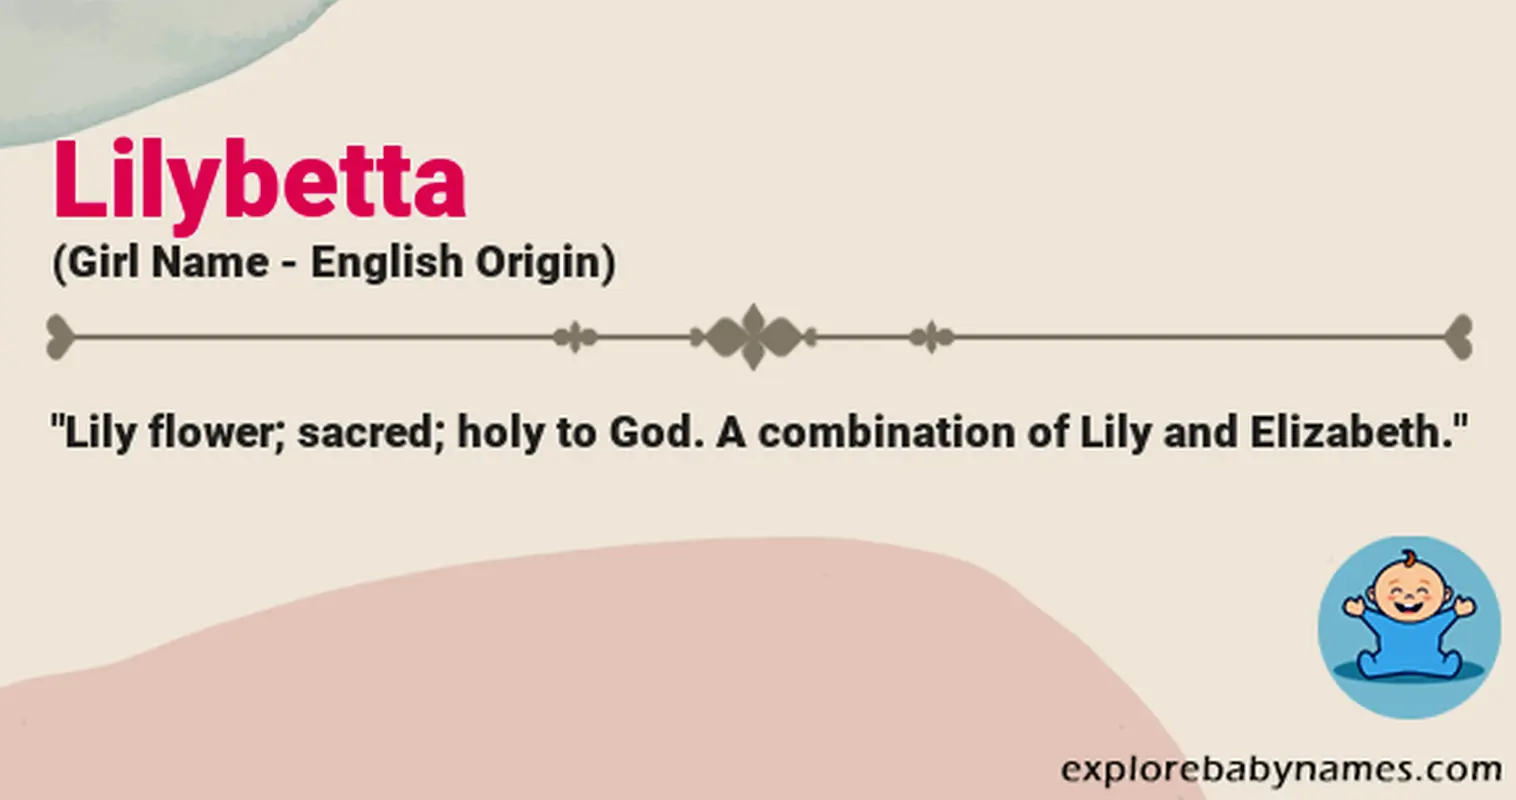 Meaning of Lilybetta